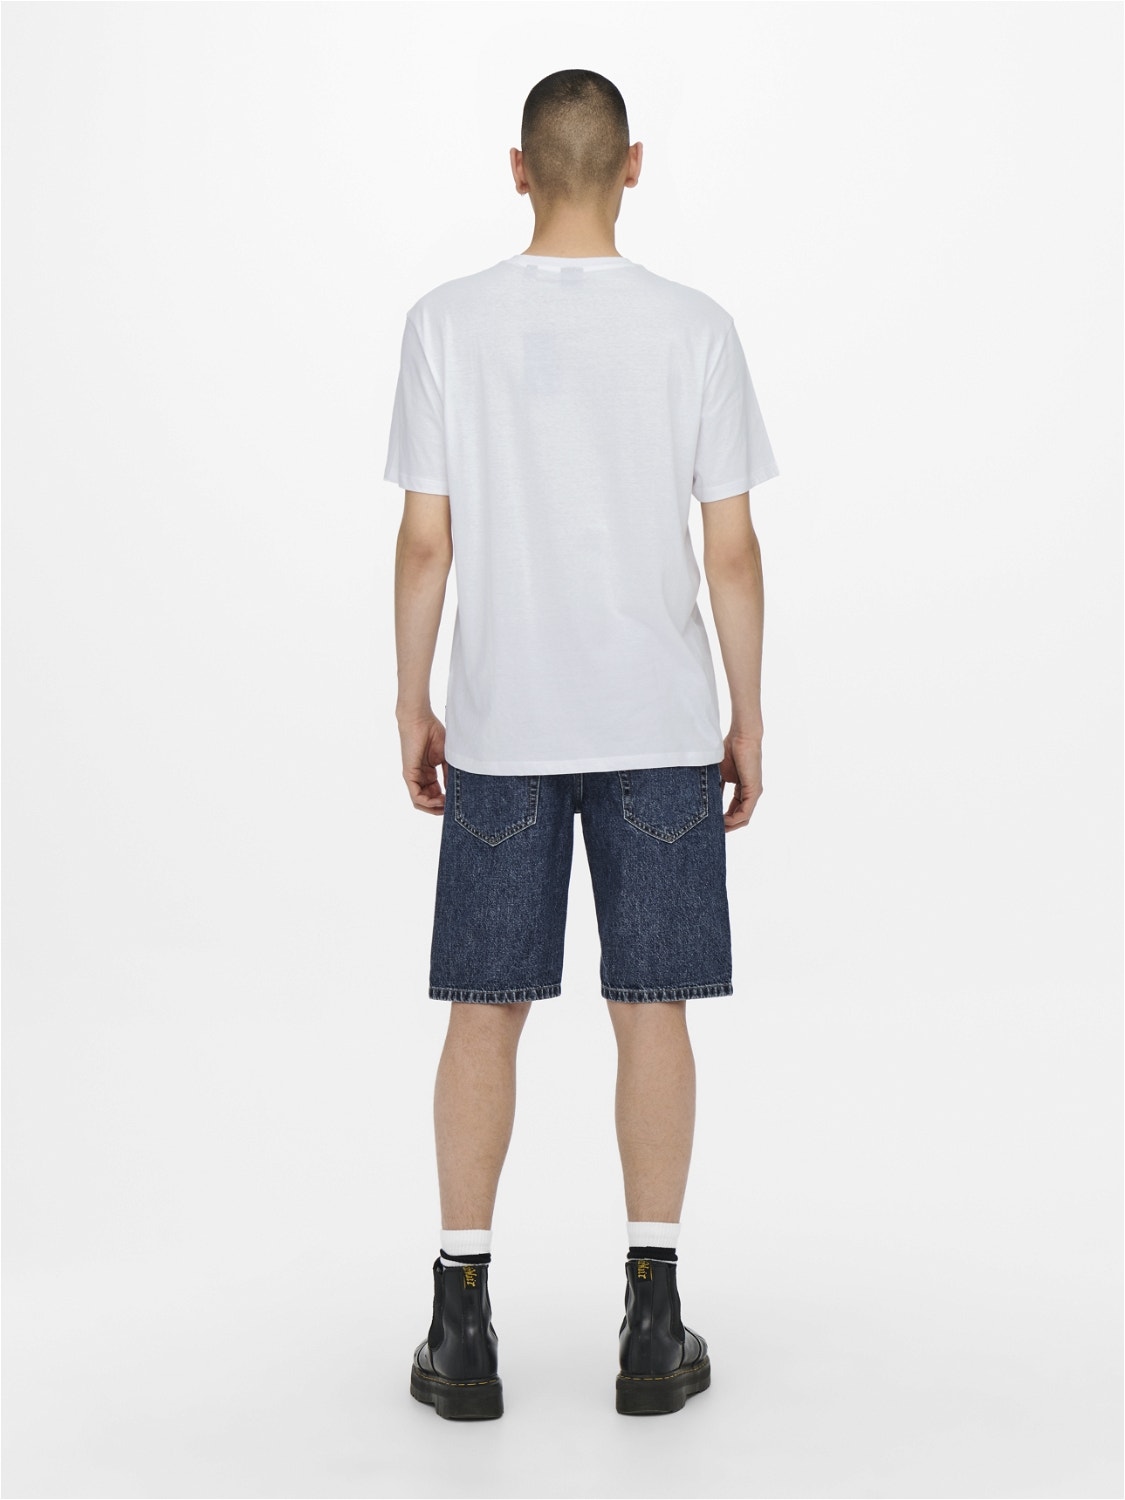 ONLY & SONS O-neck t-shirt with print -Bright White - 22022196